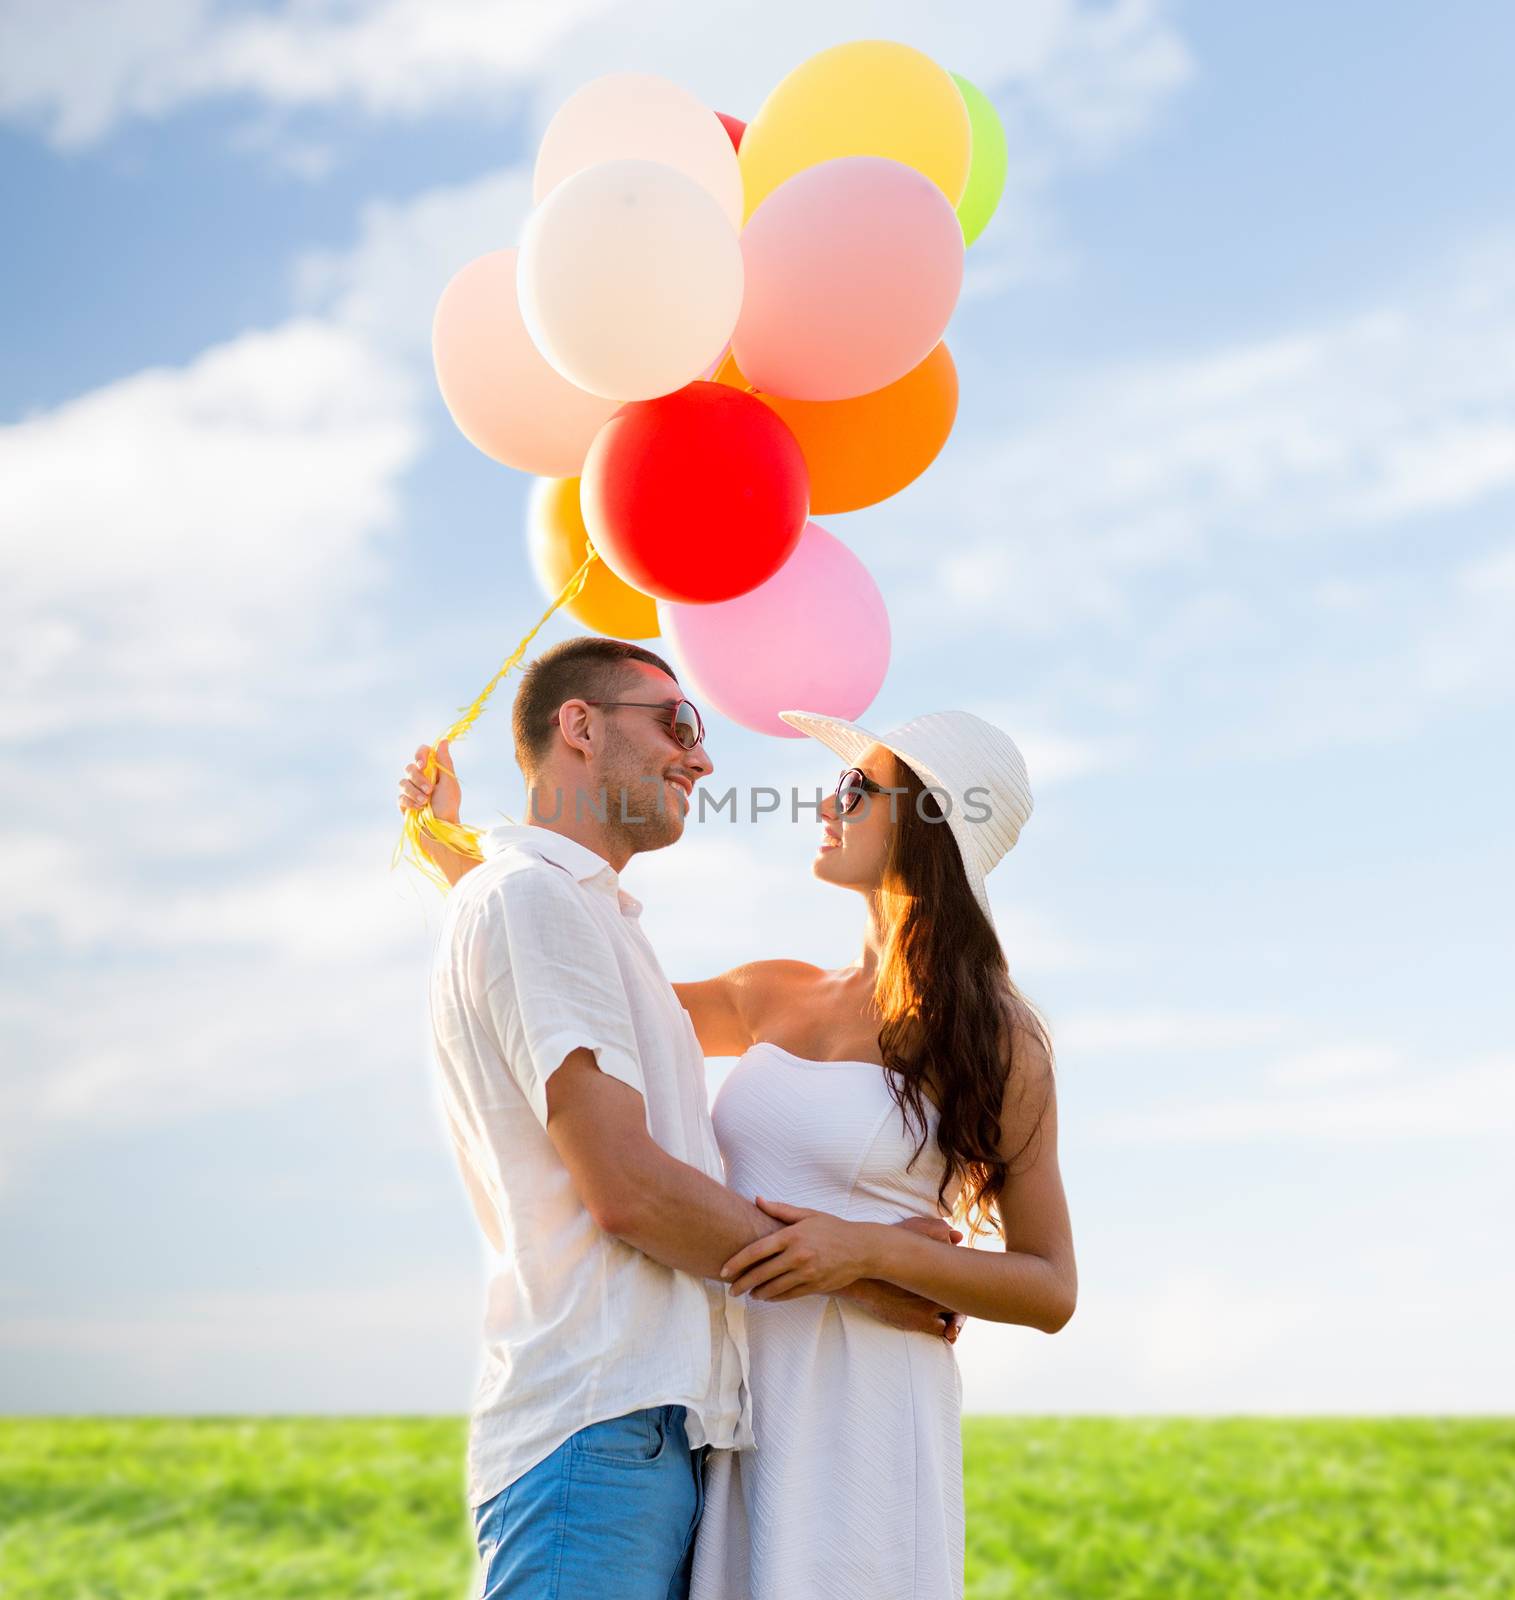 love, wedding, summer, dating and people concept - smiling couple wearing sunglasses with balloons hugging over blue sky and grass background